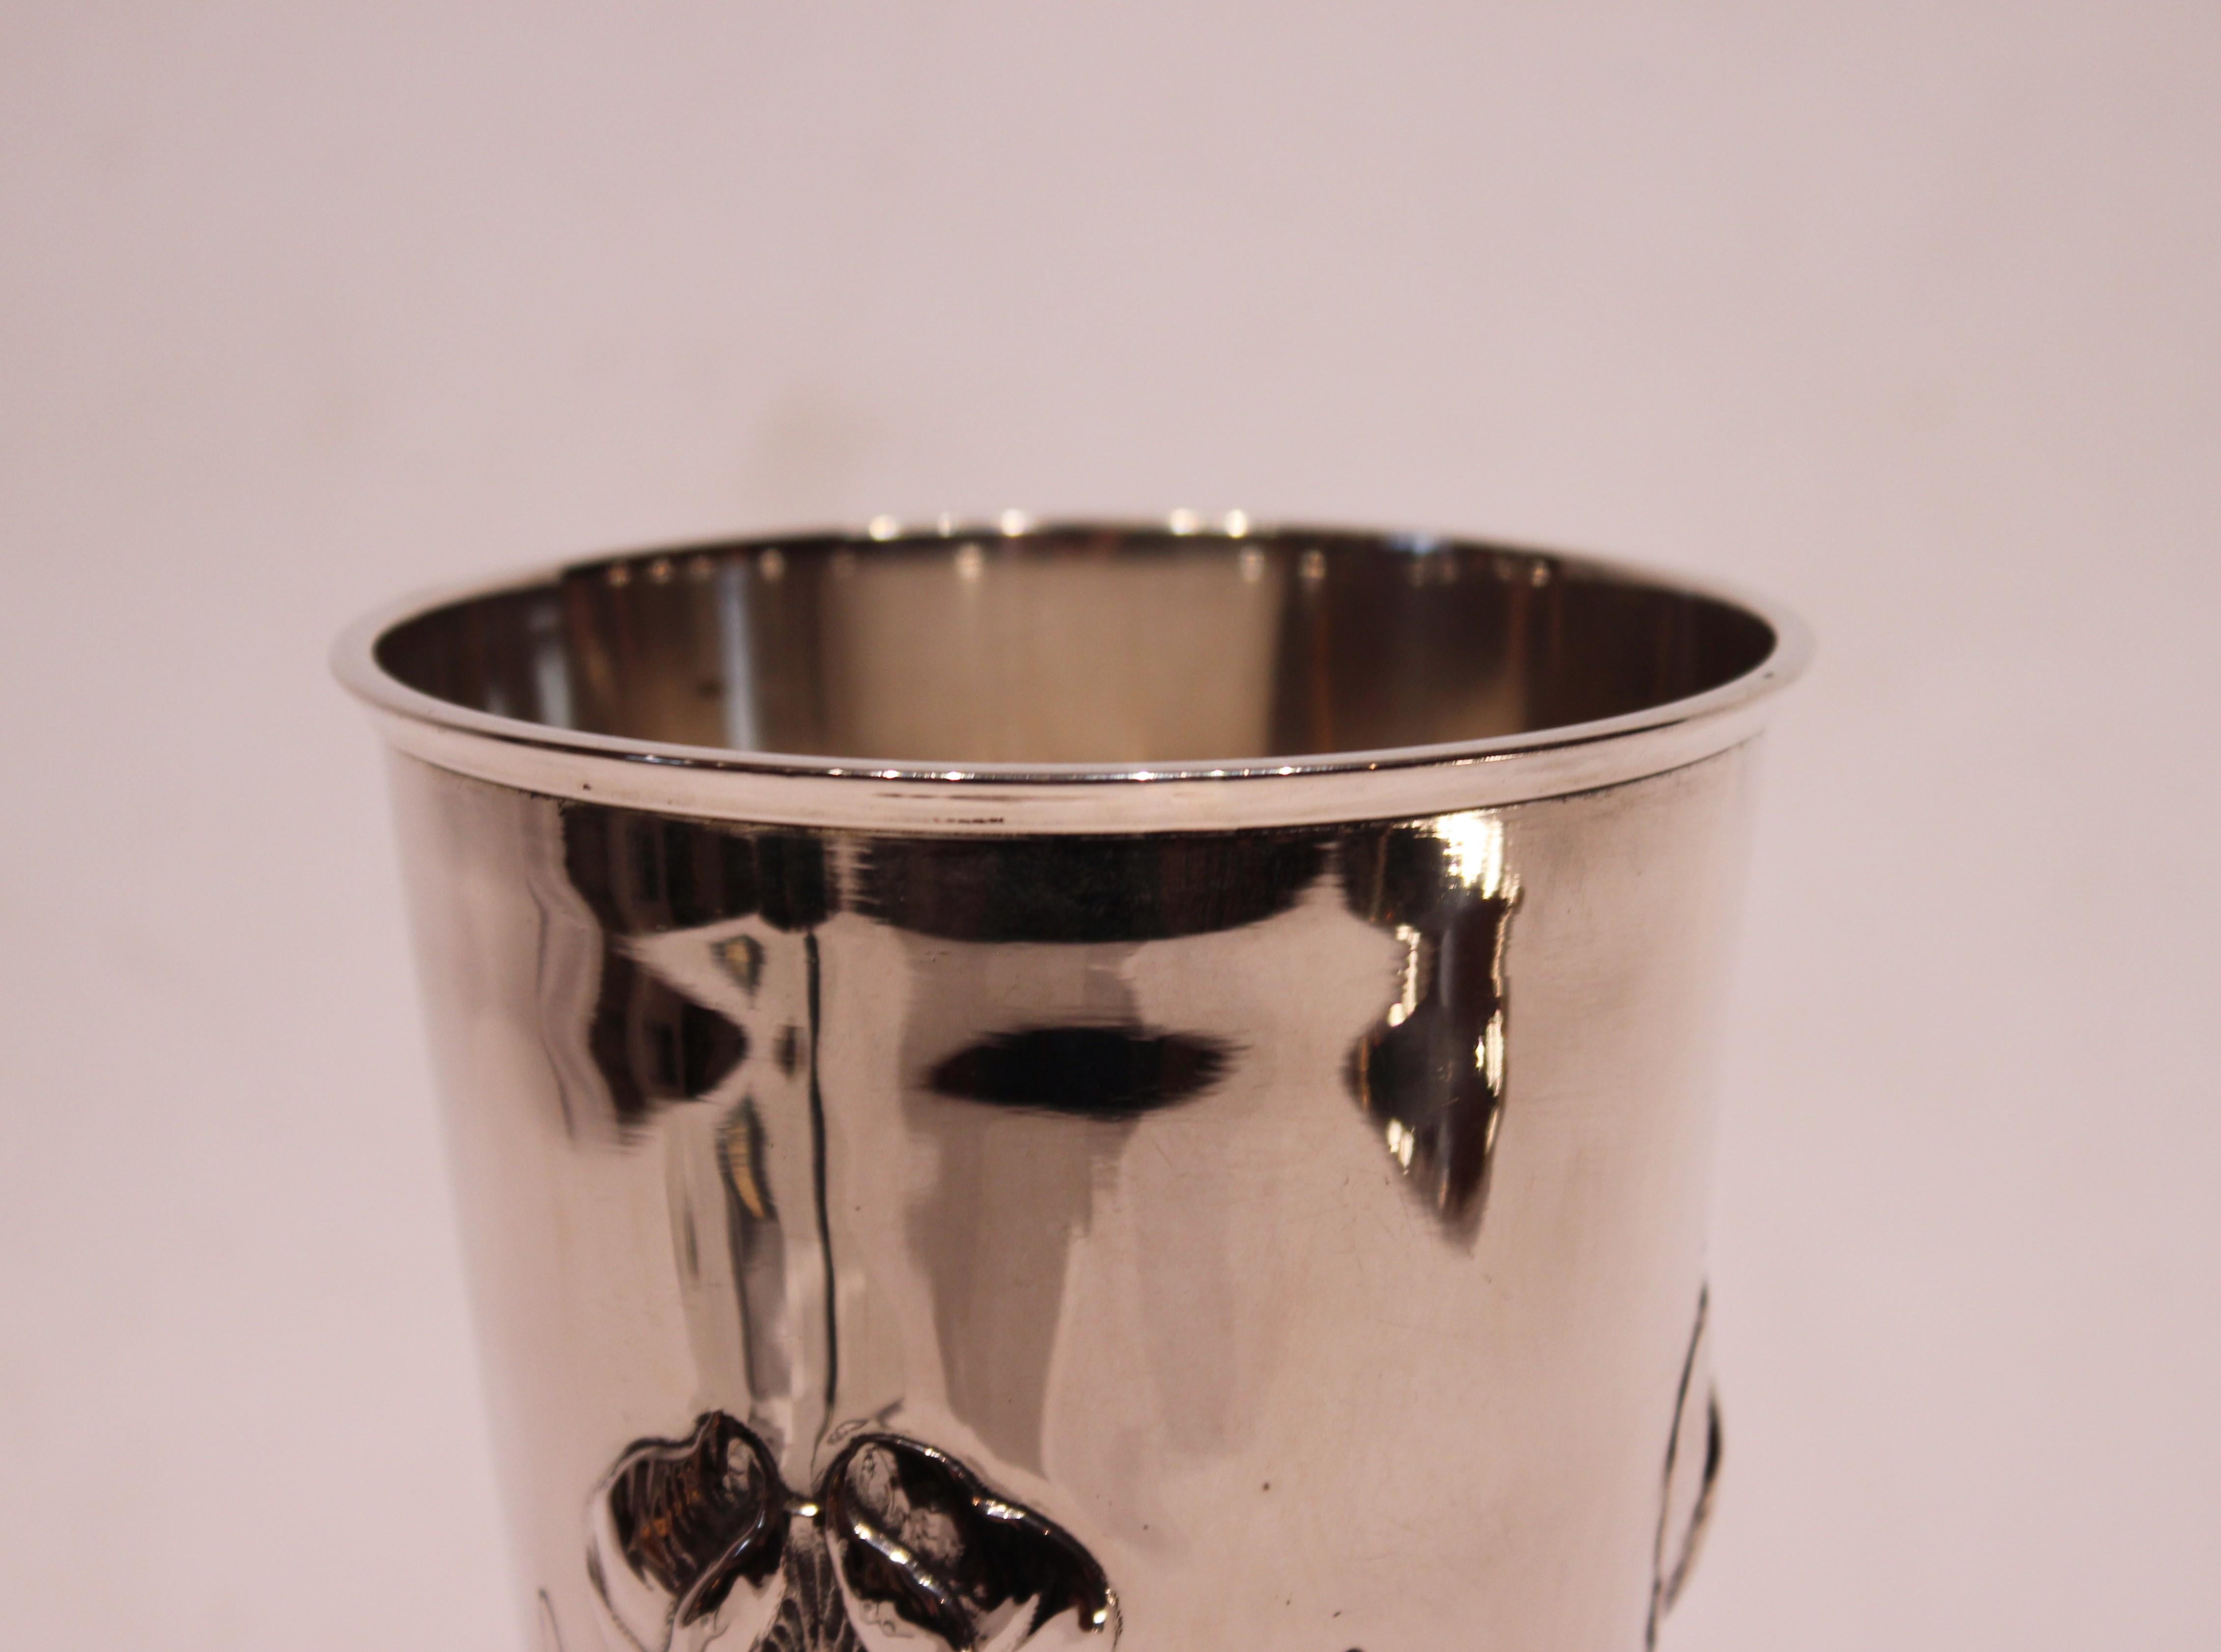 Vase decorated with flowers and of hallmarked silver. The vase is in great vintage condition.